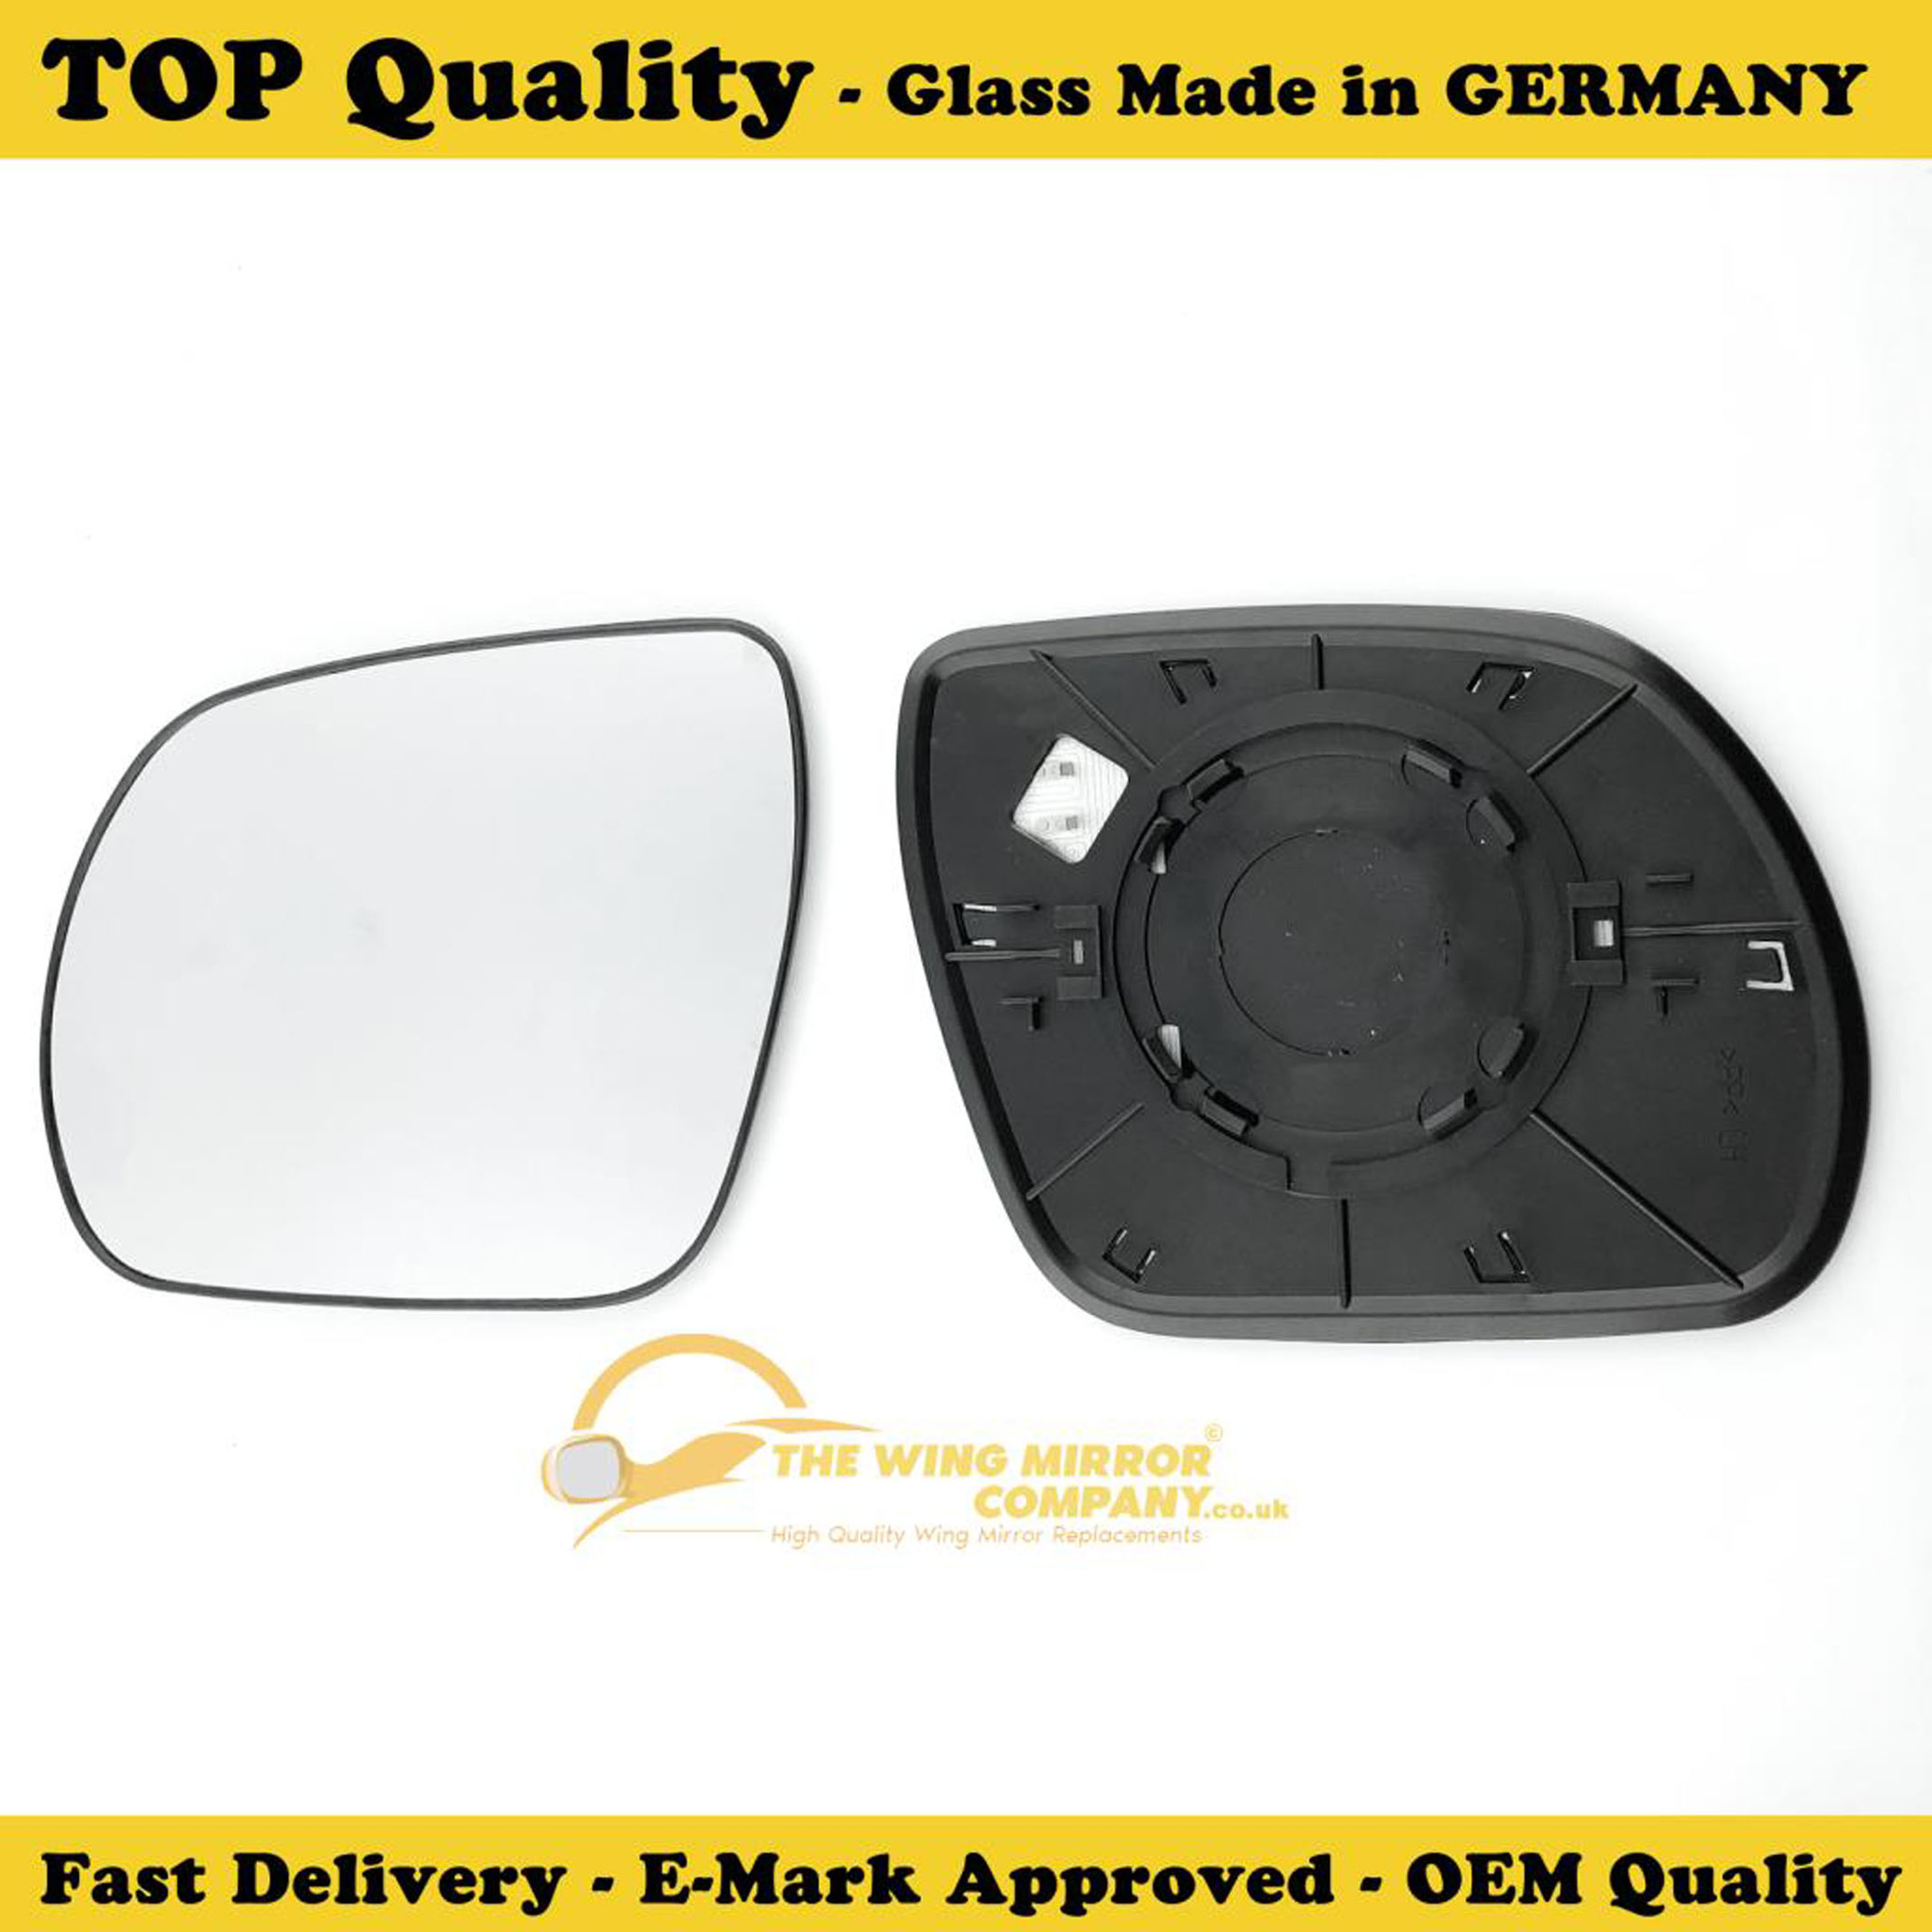 Low Price and High Quality Guarantee on hyundai santa fe Driver Side| Passenger Side Wing Mirror 2010 Hyundai Santa Fe Passenger Side Mirror Replacement